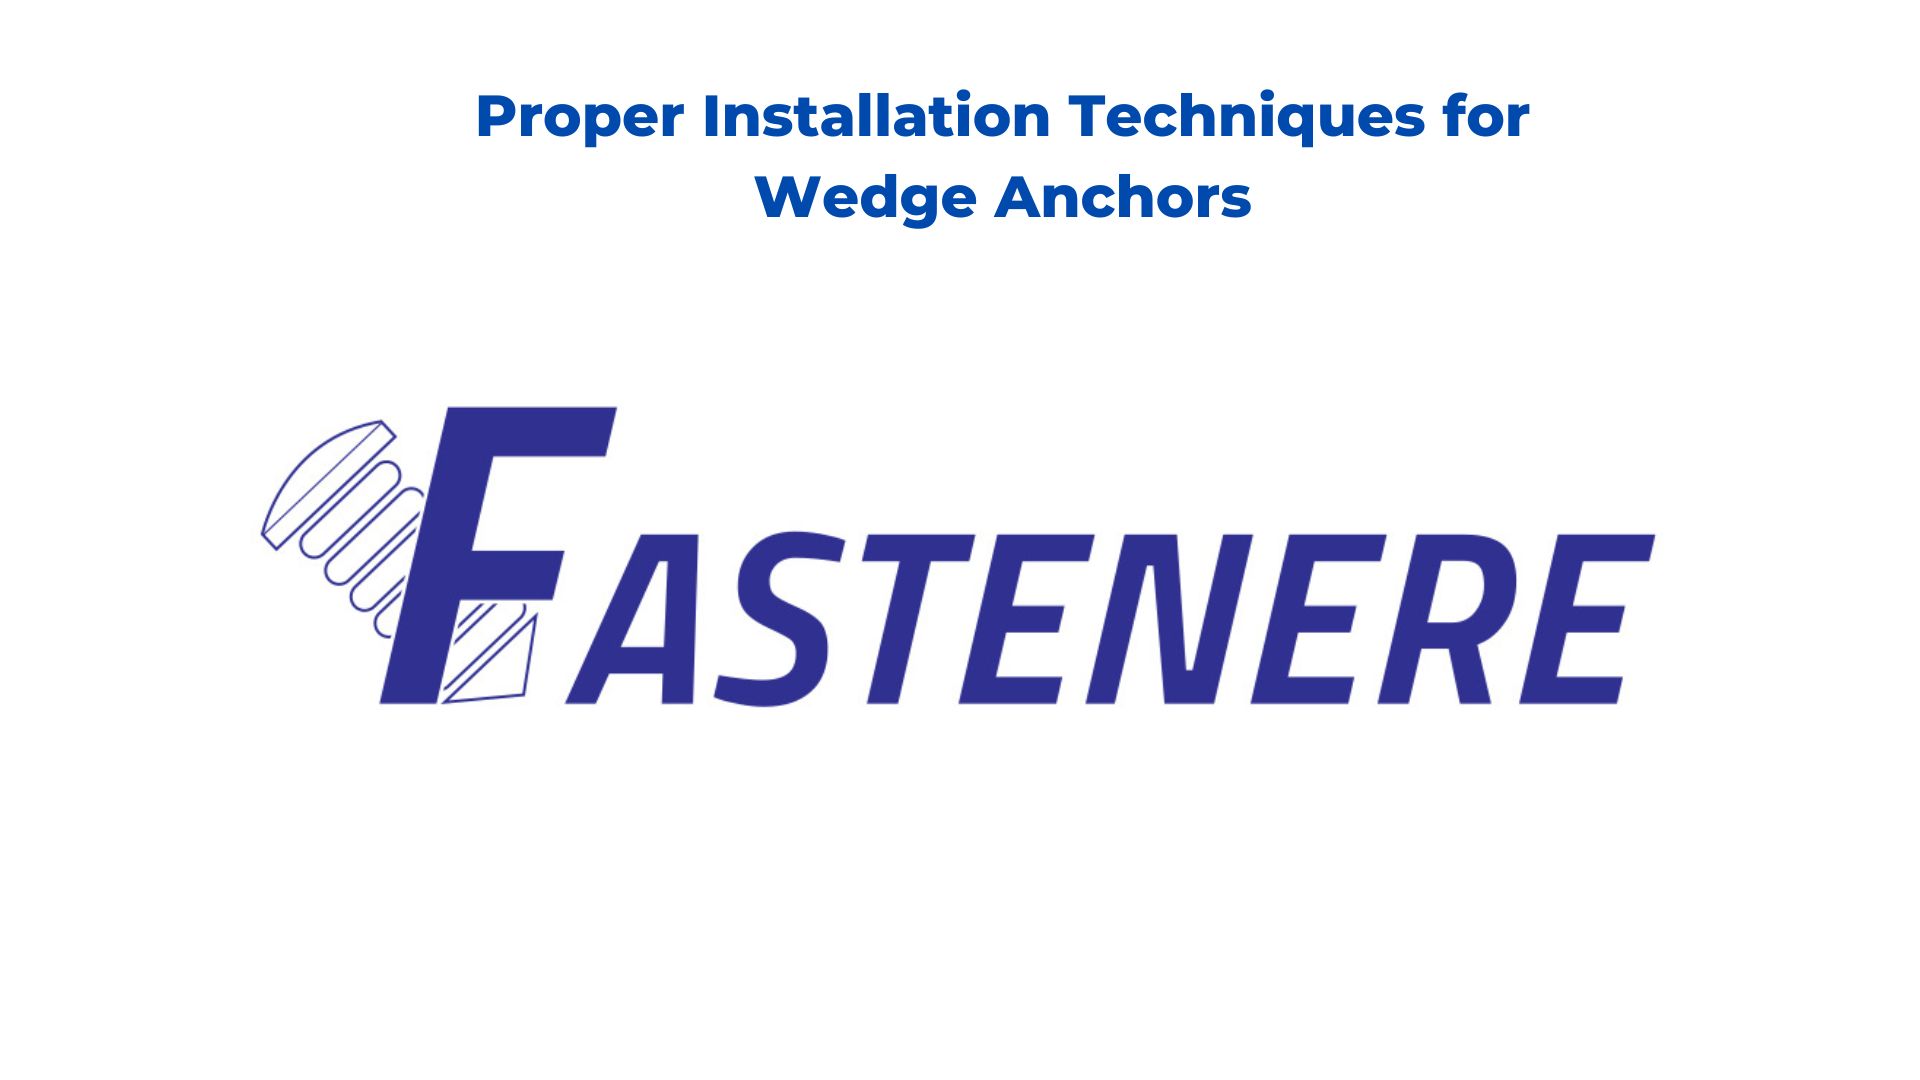 Proper Installation Techniques for Wedge Anchors